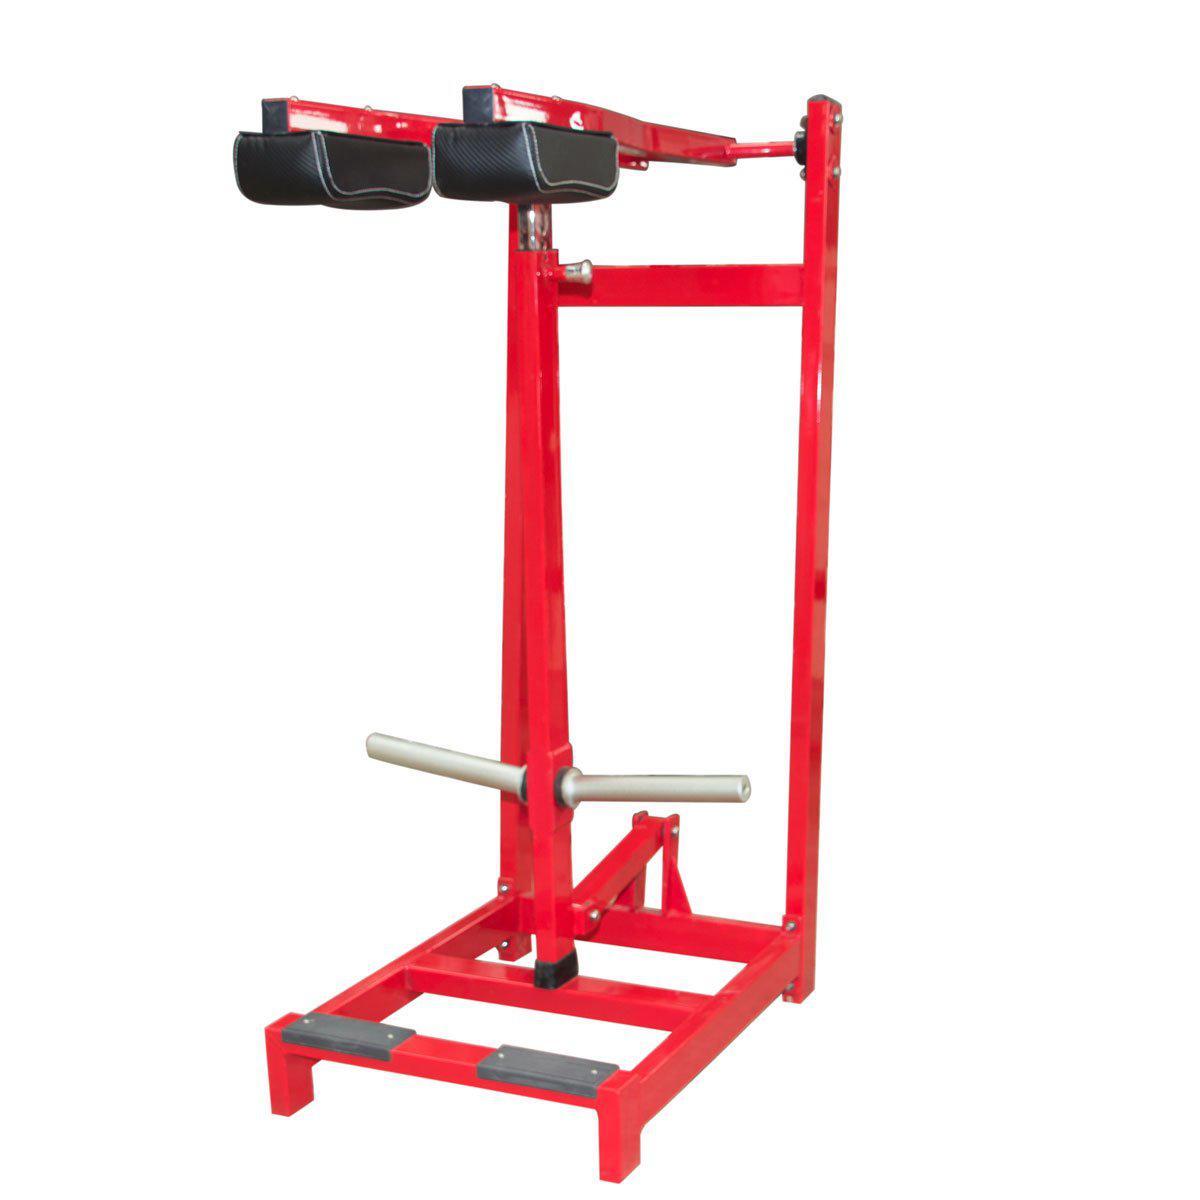 COMMERCIAL PLATE LOADED STANDING CALF RAISE 1-Commercial Calf Raises-Gym Direct